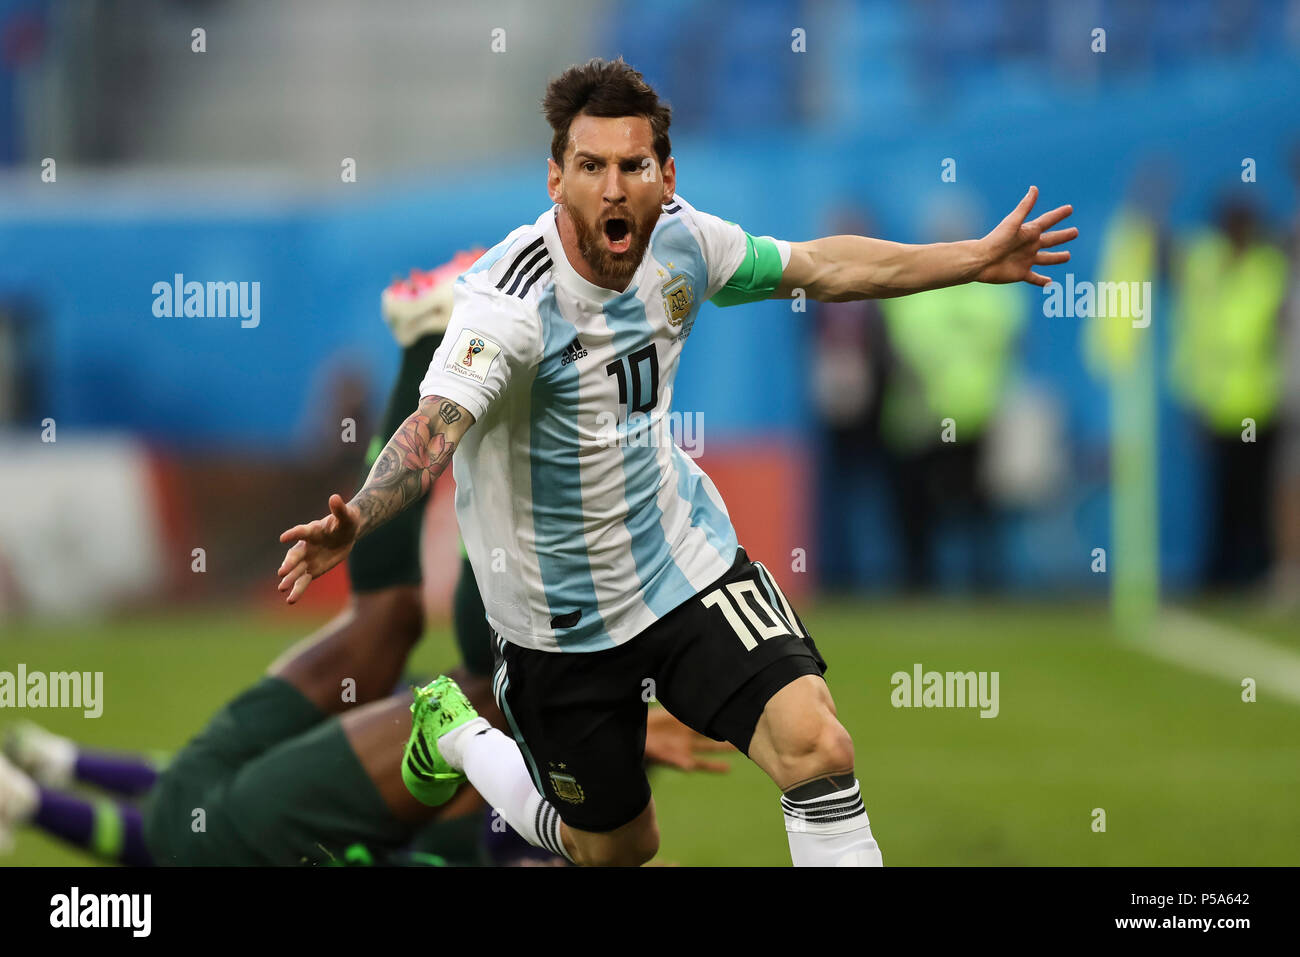 St Petersburg, Russia. 26th Jun, 2018. Lionel Messi of Argentina celebrates after scoring his side's first goal to make the score 1-0 during the 2018 FIFA World Cup Group D match between Nigeria and Argentina at Saint Petersburg Stadium on June 26th 2018 in Saint Petersburg, Russia. (Photo by Daniel Chesterton/phcimages.com) Credit: PHC Images/Alamy Live News Stock Photo